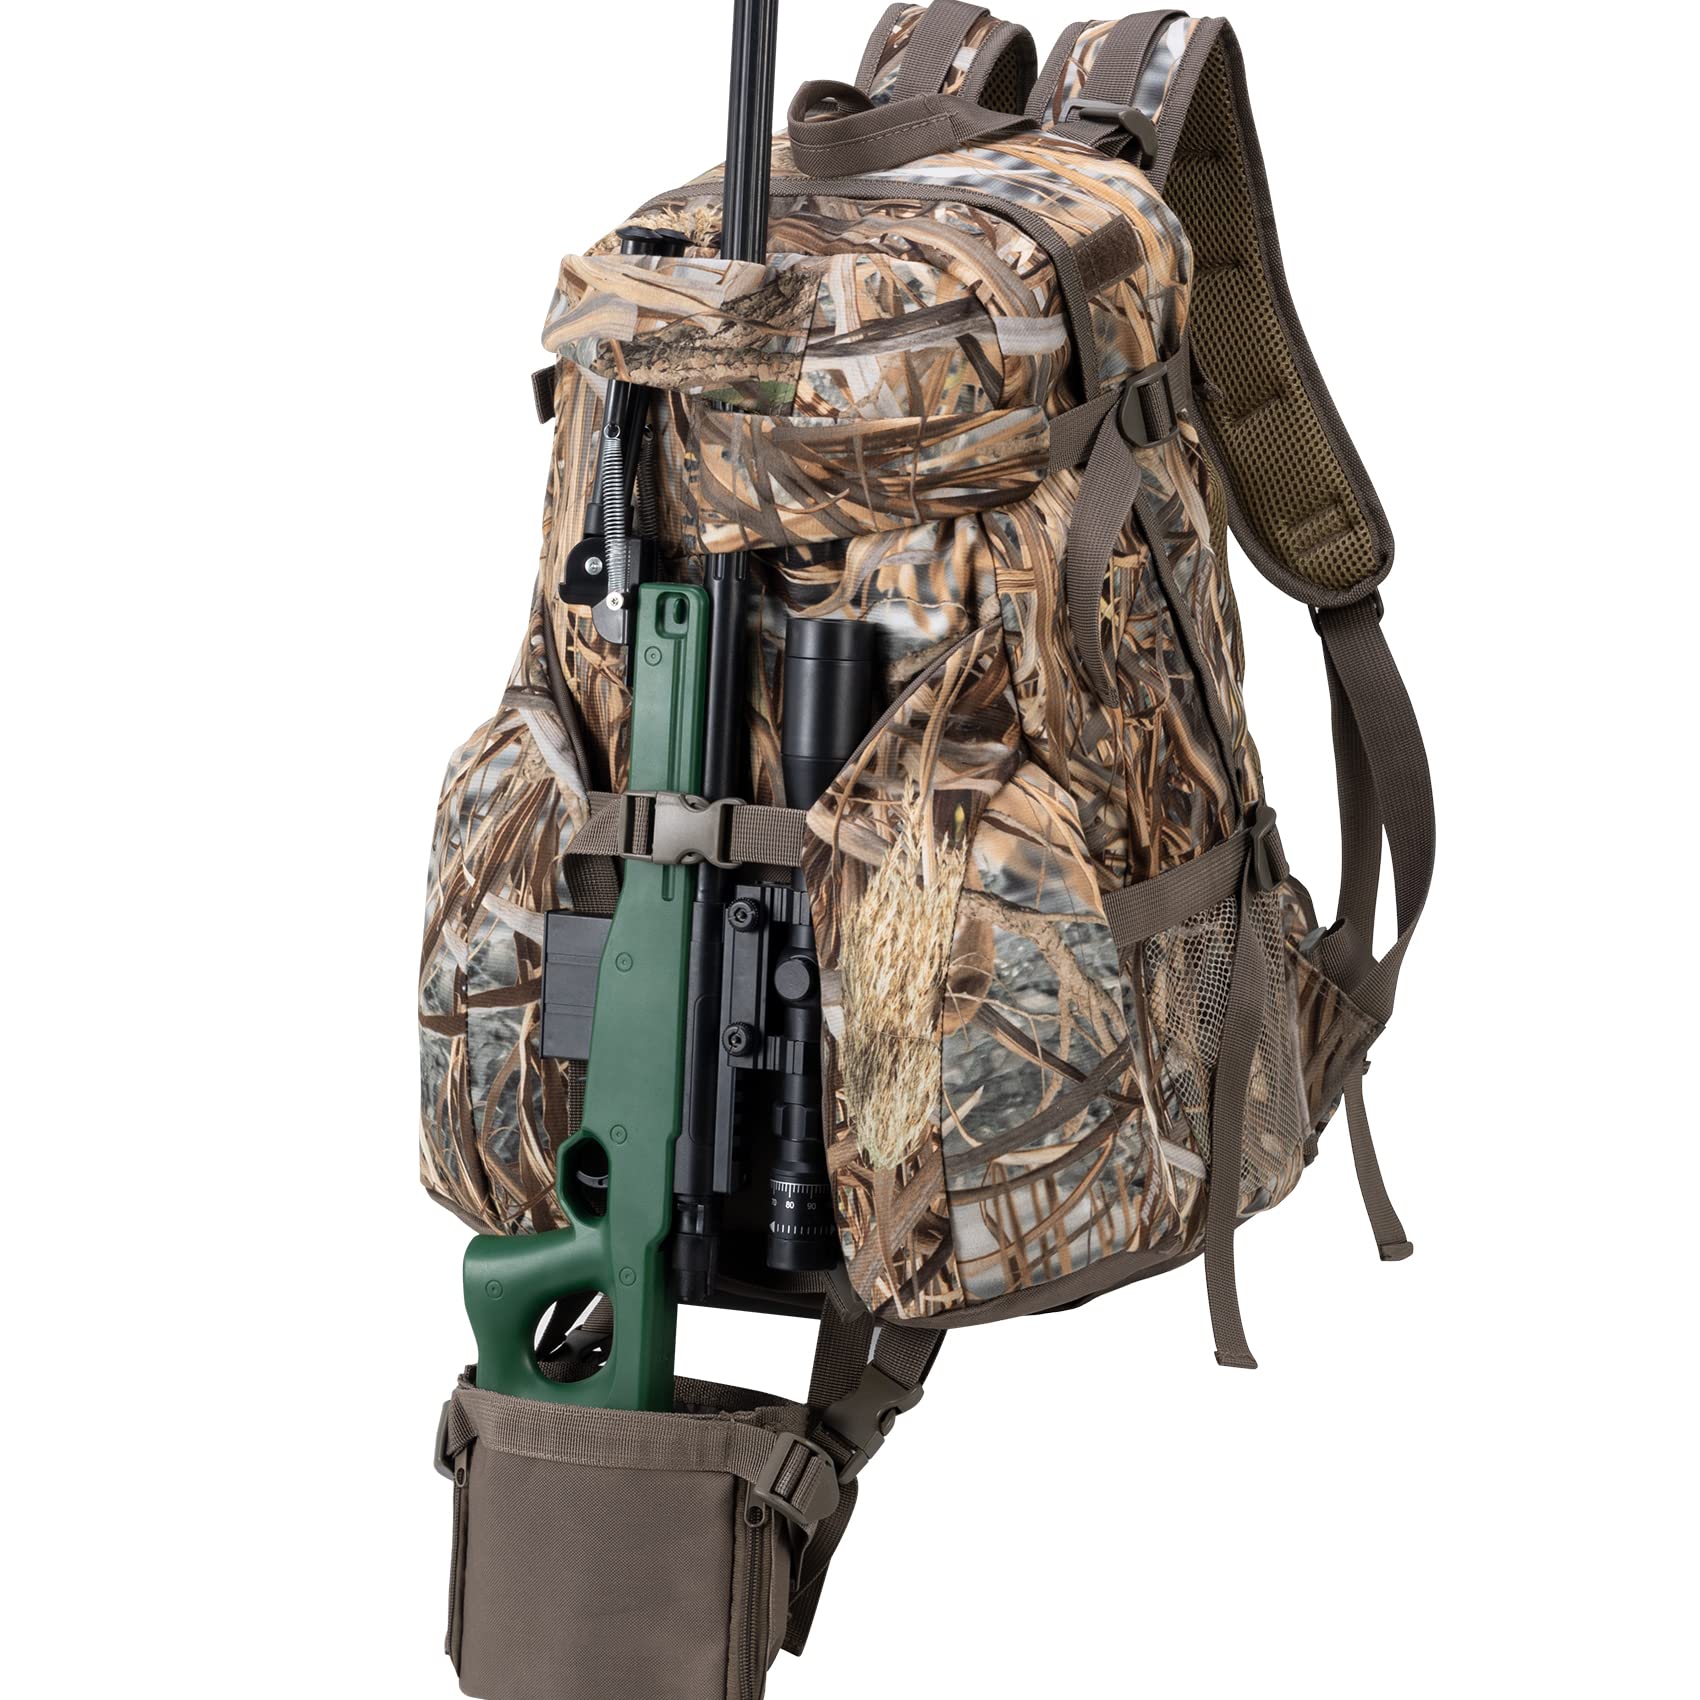 BLISSWILL Hunting Backpack Outdoor Gear Hunting Daypack for Rifle Bow Gun